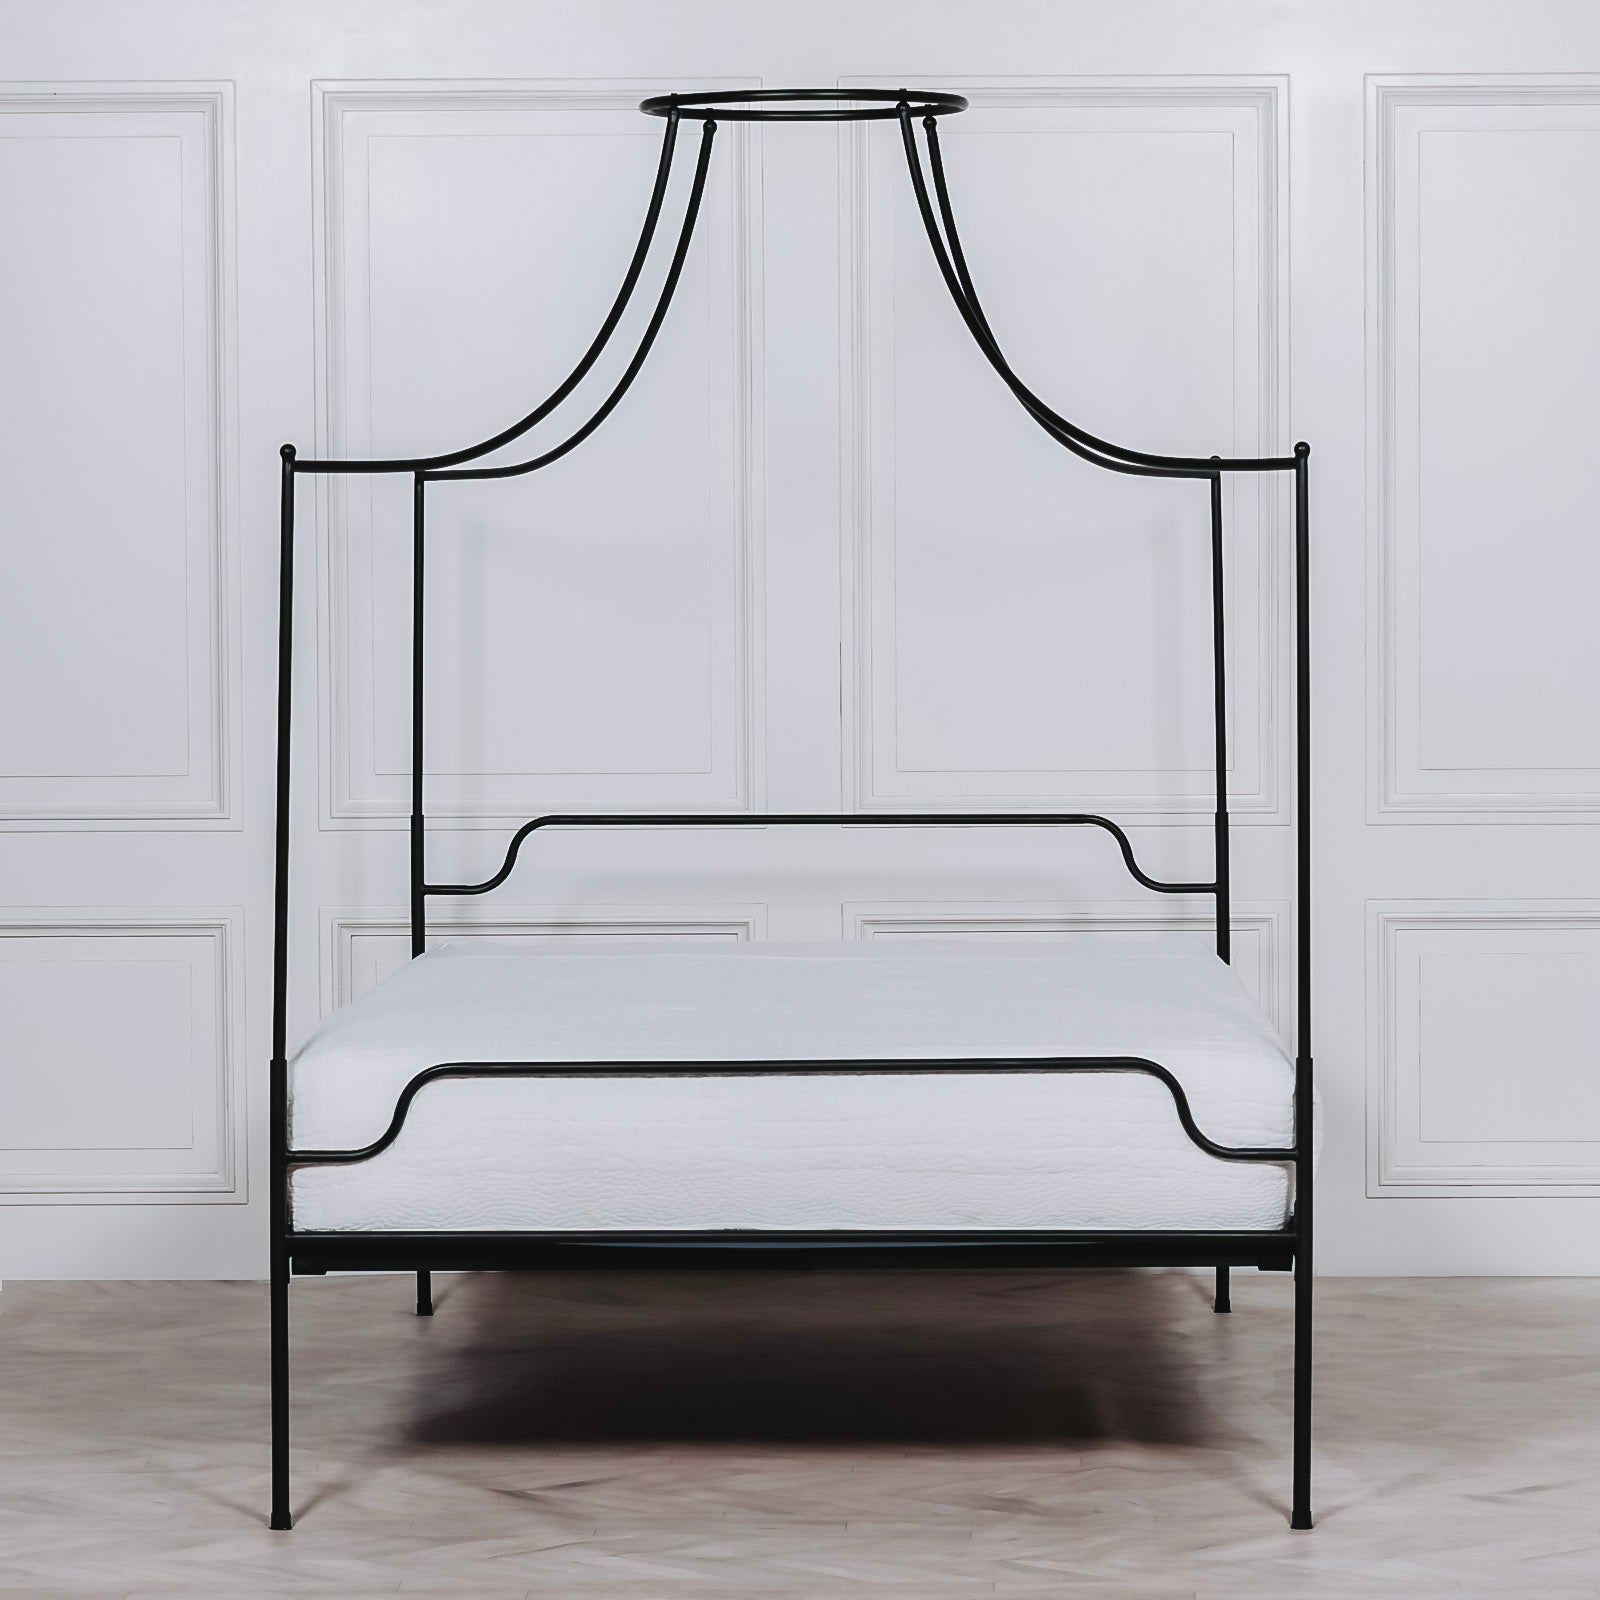 Lanciano Black Iron 4ft6 Double Size Metal Poster Bed